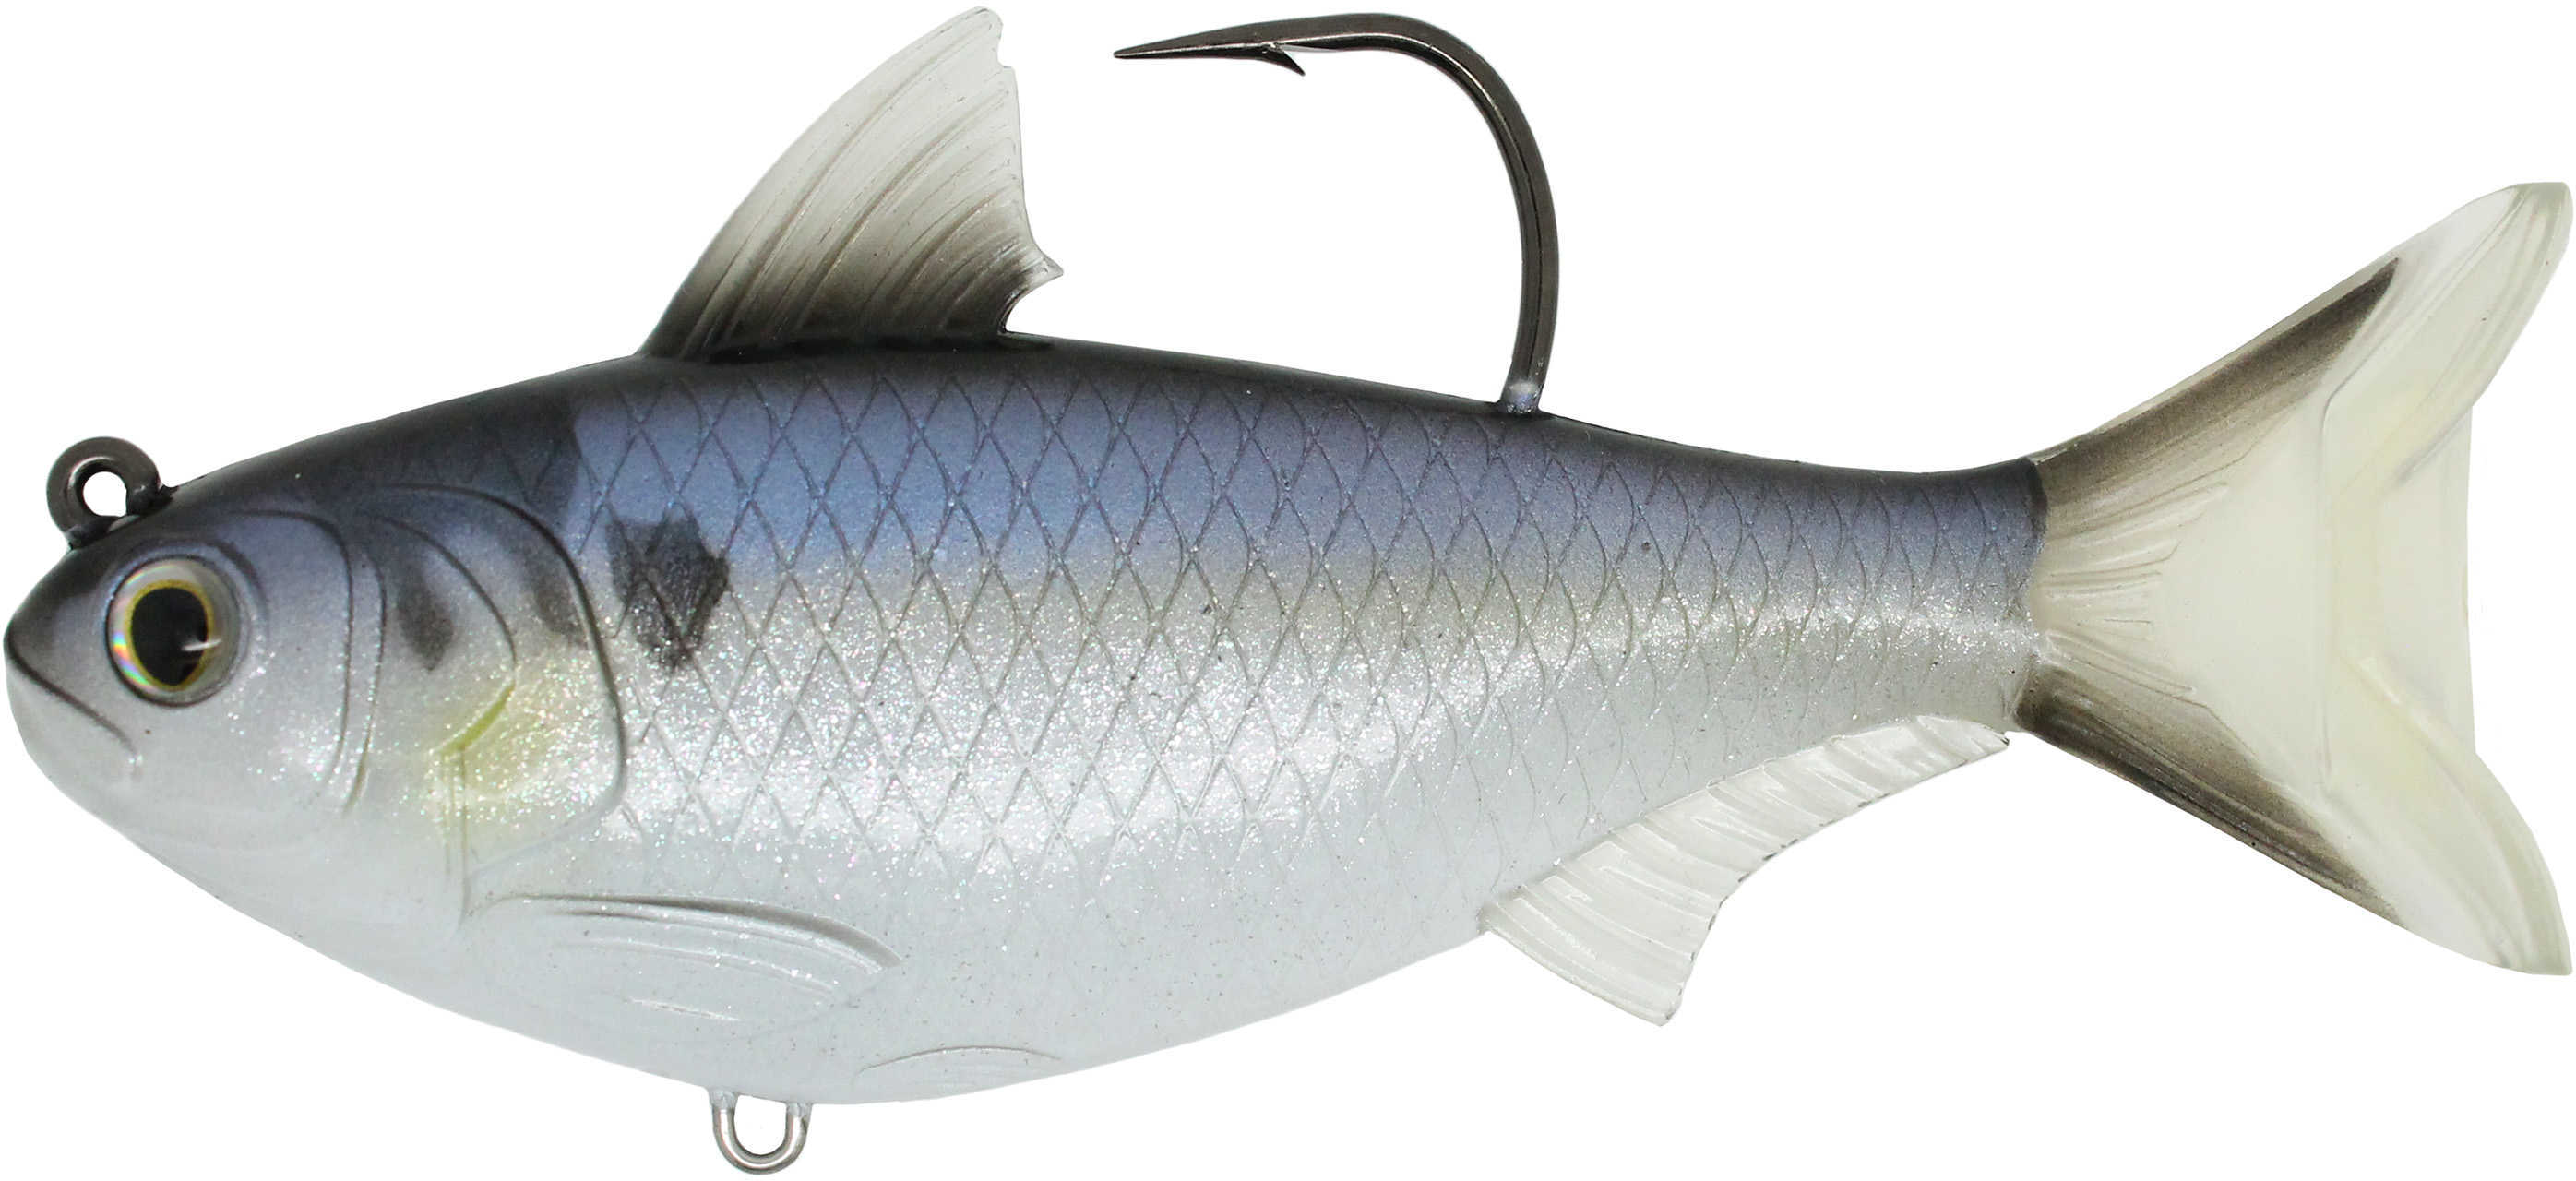 LIVETARGET Lures / Koppers Fishing and Tackle Corp Gizzard Shad Freshwater 4 1/2" 6/0 Hook Medium/Slow Sinking White/Blue Md: GZS11